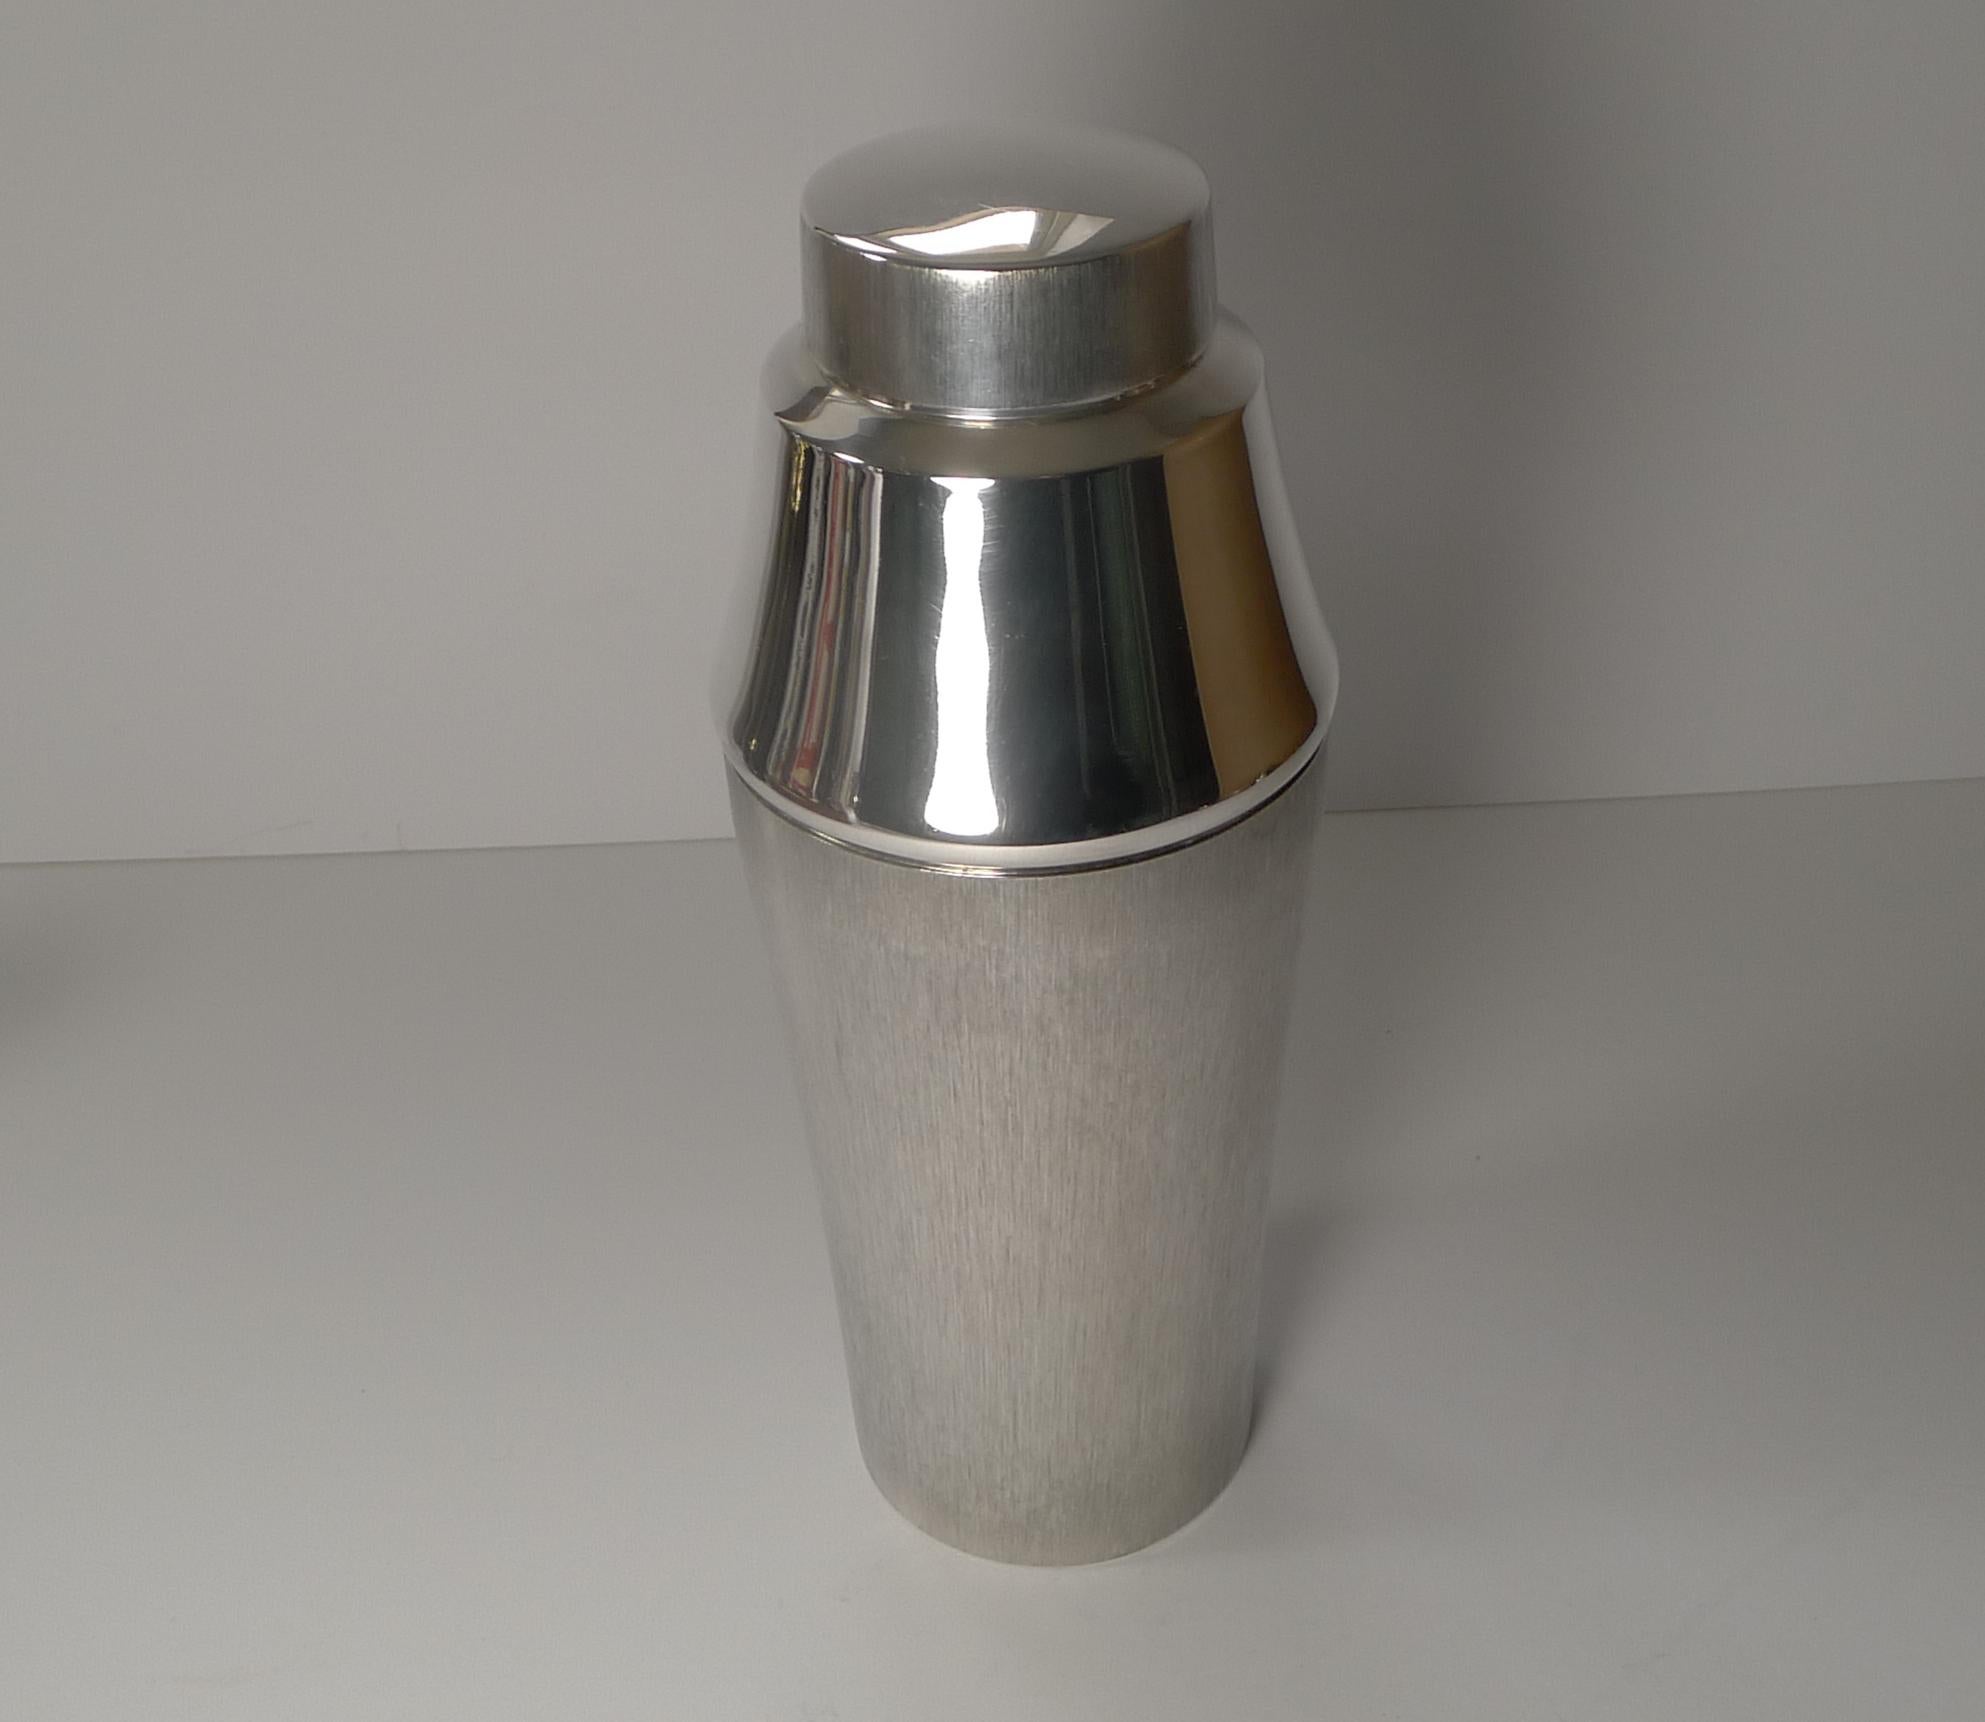 A really stylish retro / vintage cocktail shaker with the body and the lid to the top having a brushed / bark decoration, a lovely combination together with the mirror finish silver plate.

The underside is marked for the silversmith, Lutz and